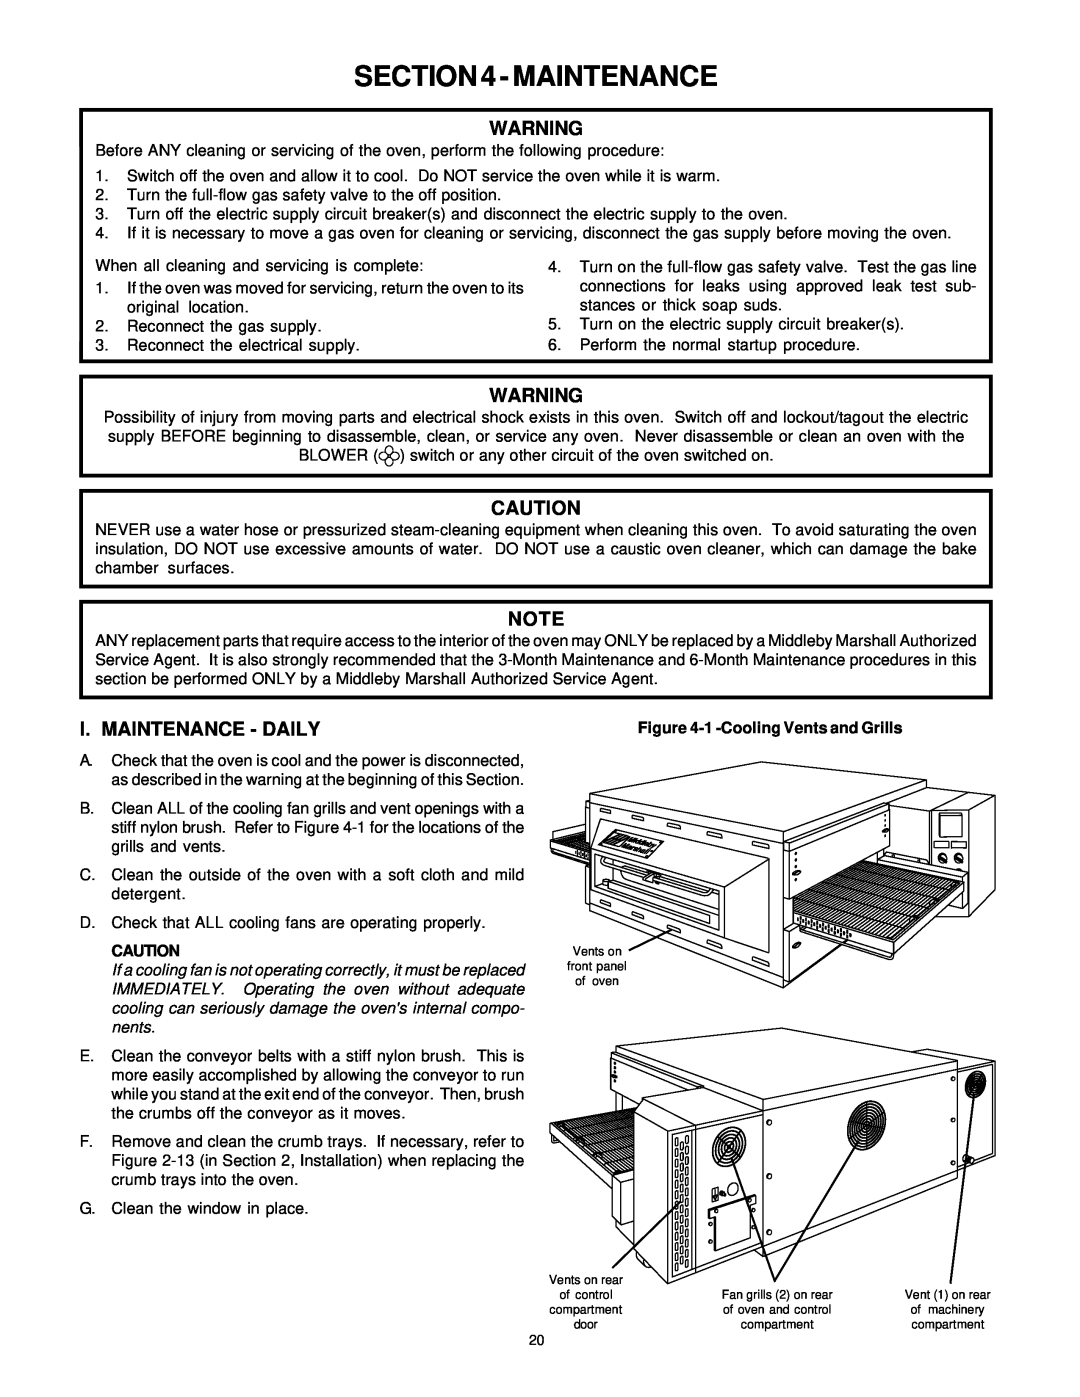 Middleby Marshall PS536GS manual English, I. Maintenance - Daily, 1 -CoolingVents and Grills 